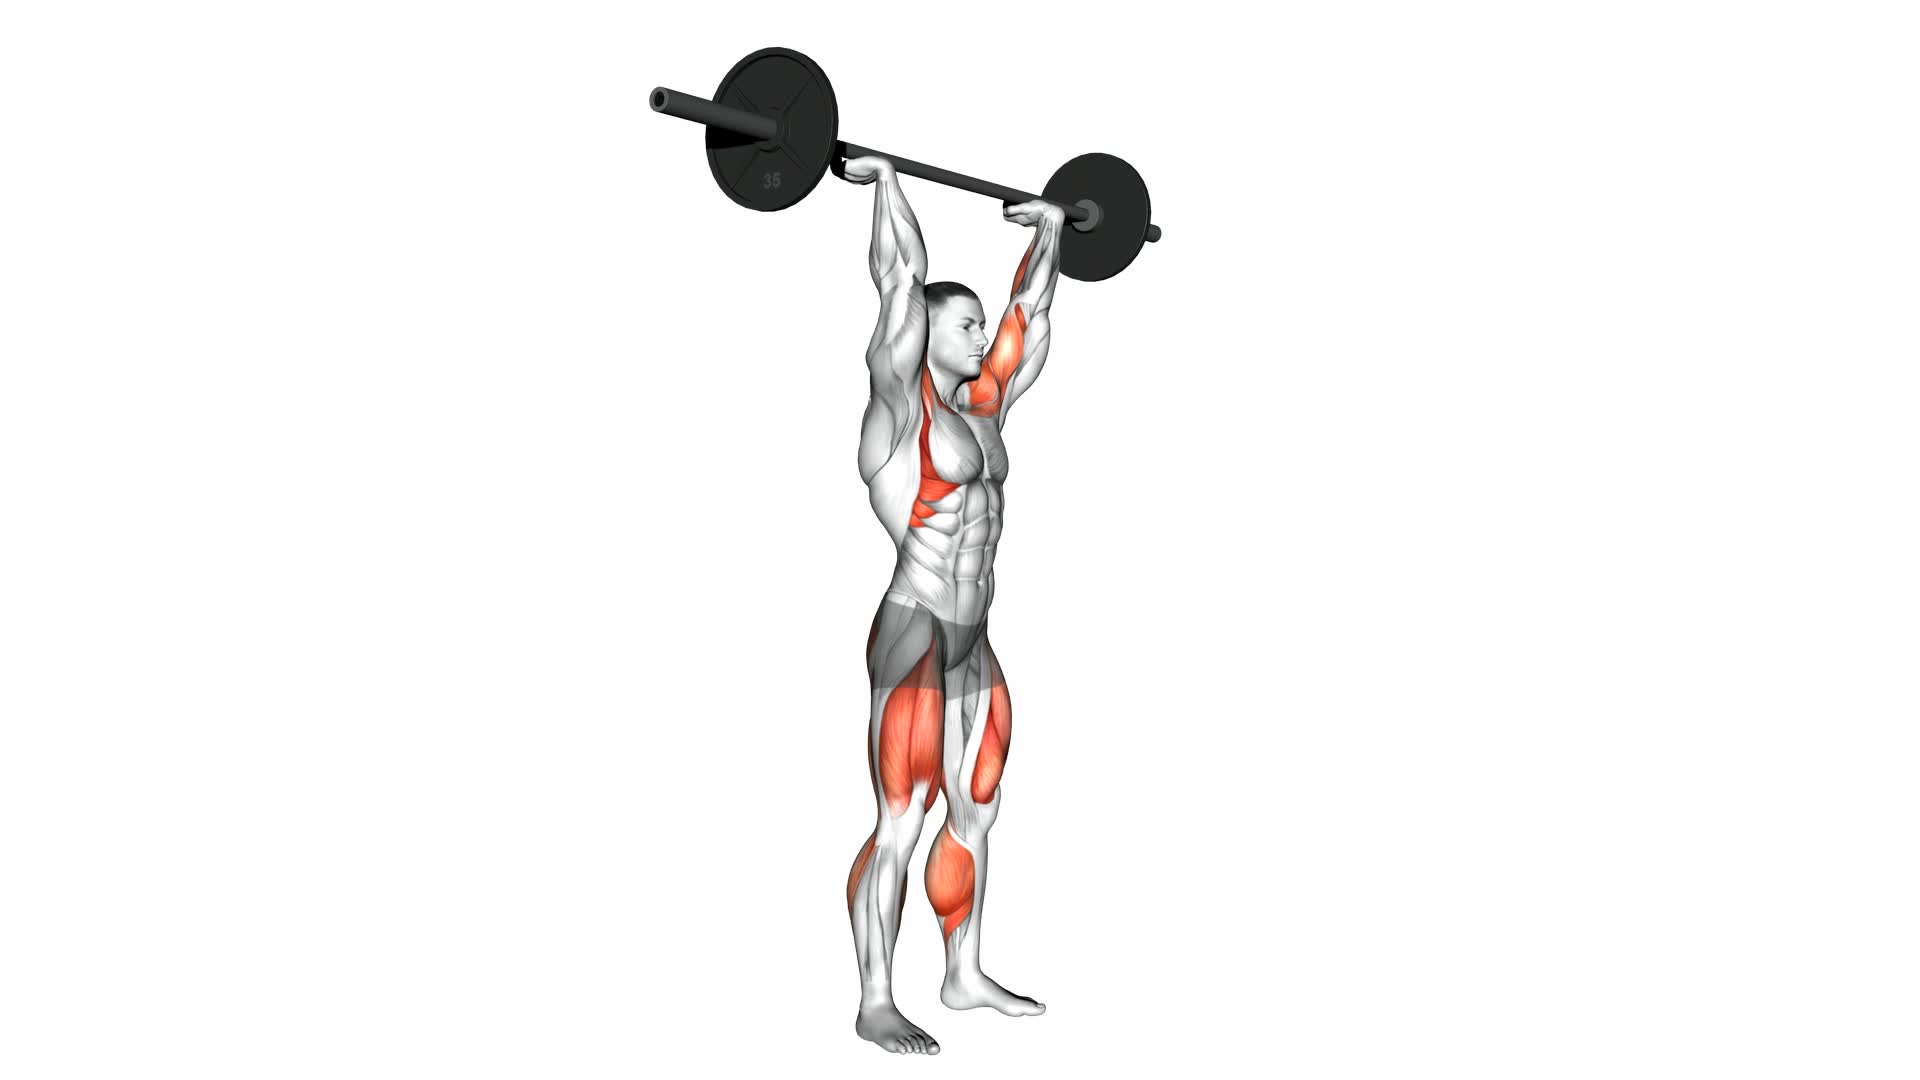 Push Press - Video Exercise Guide & Tips